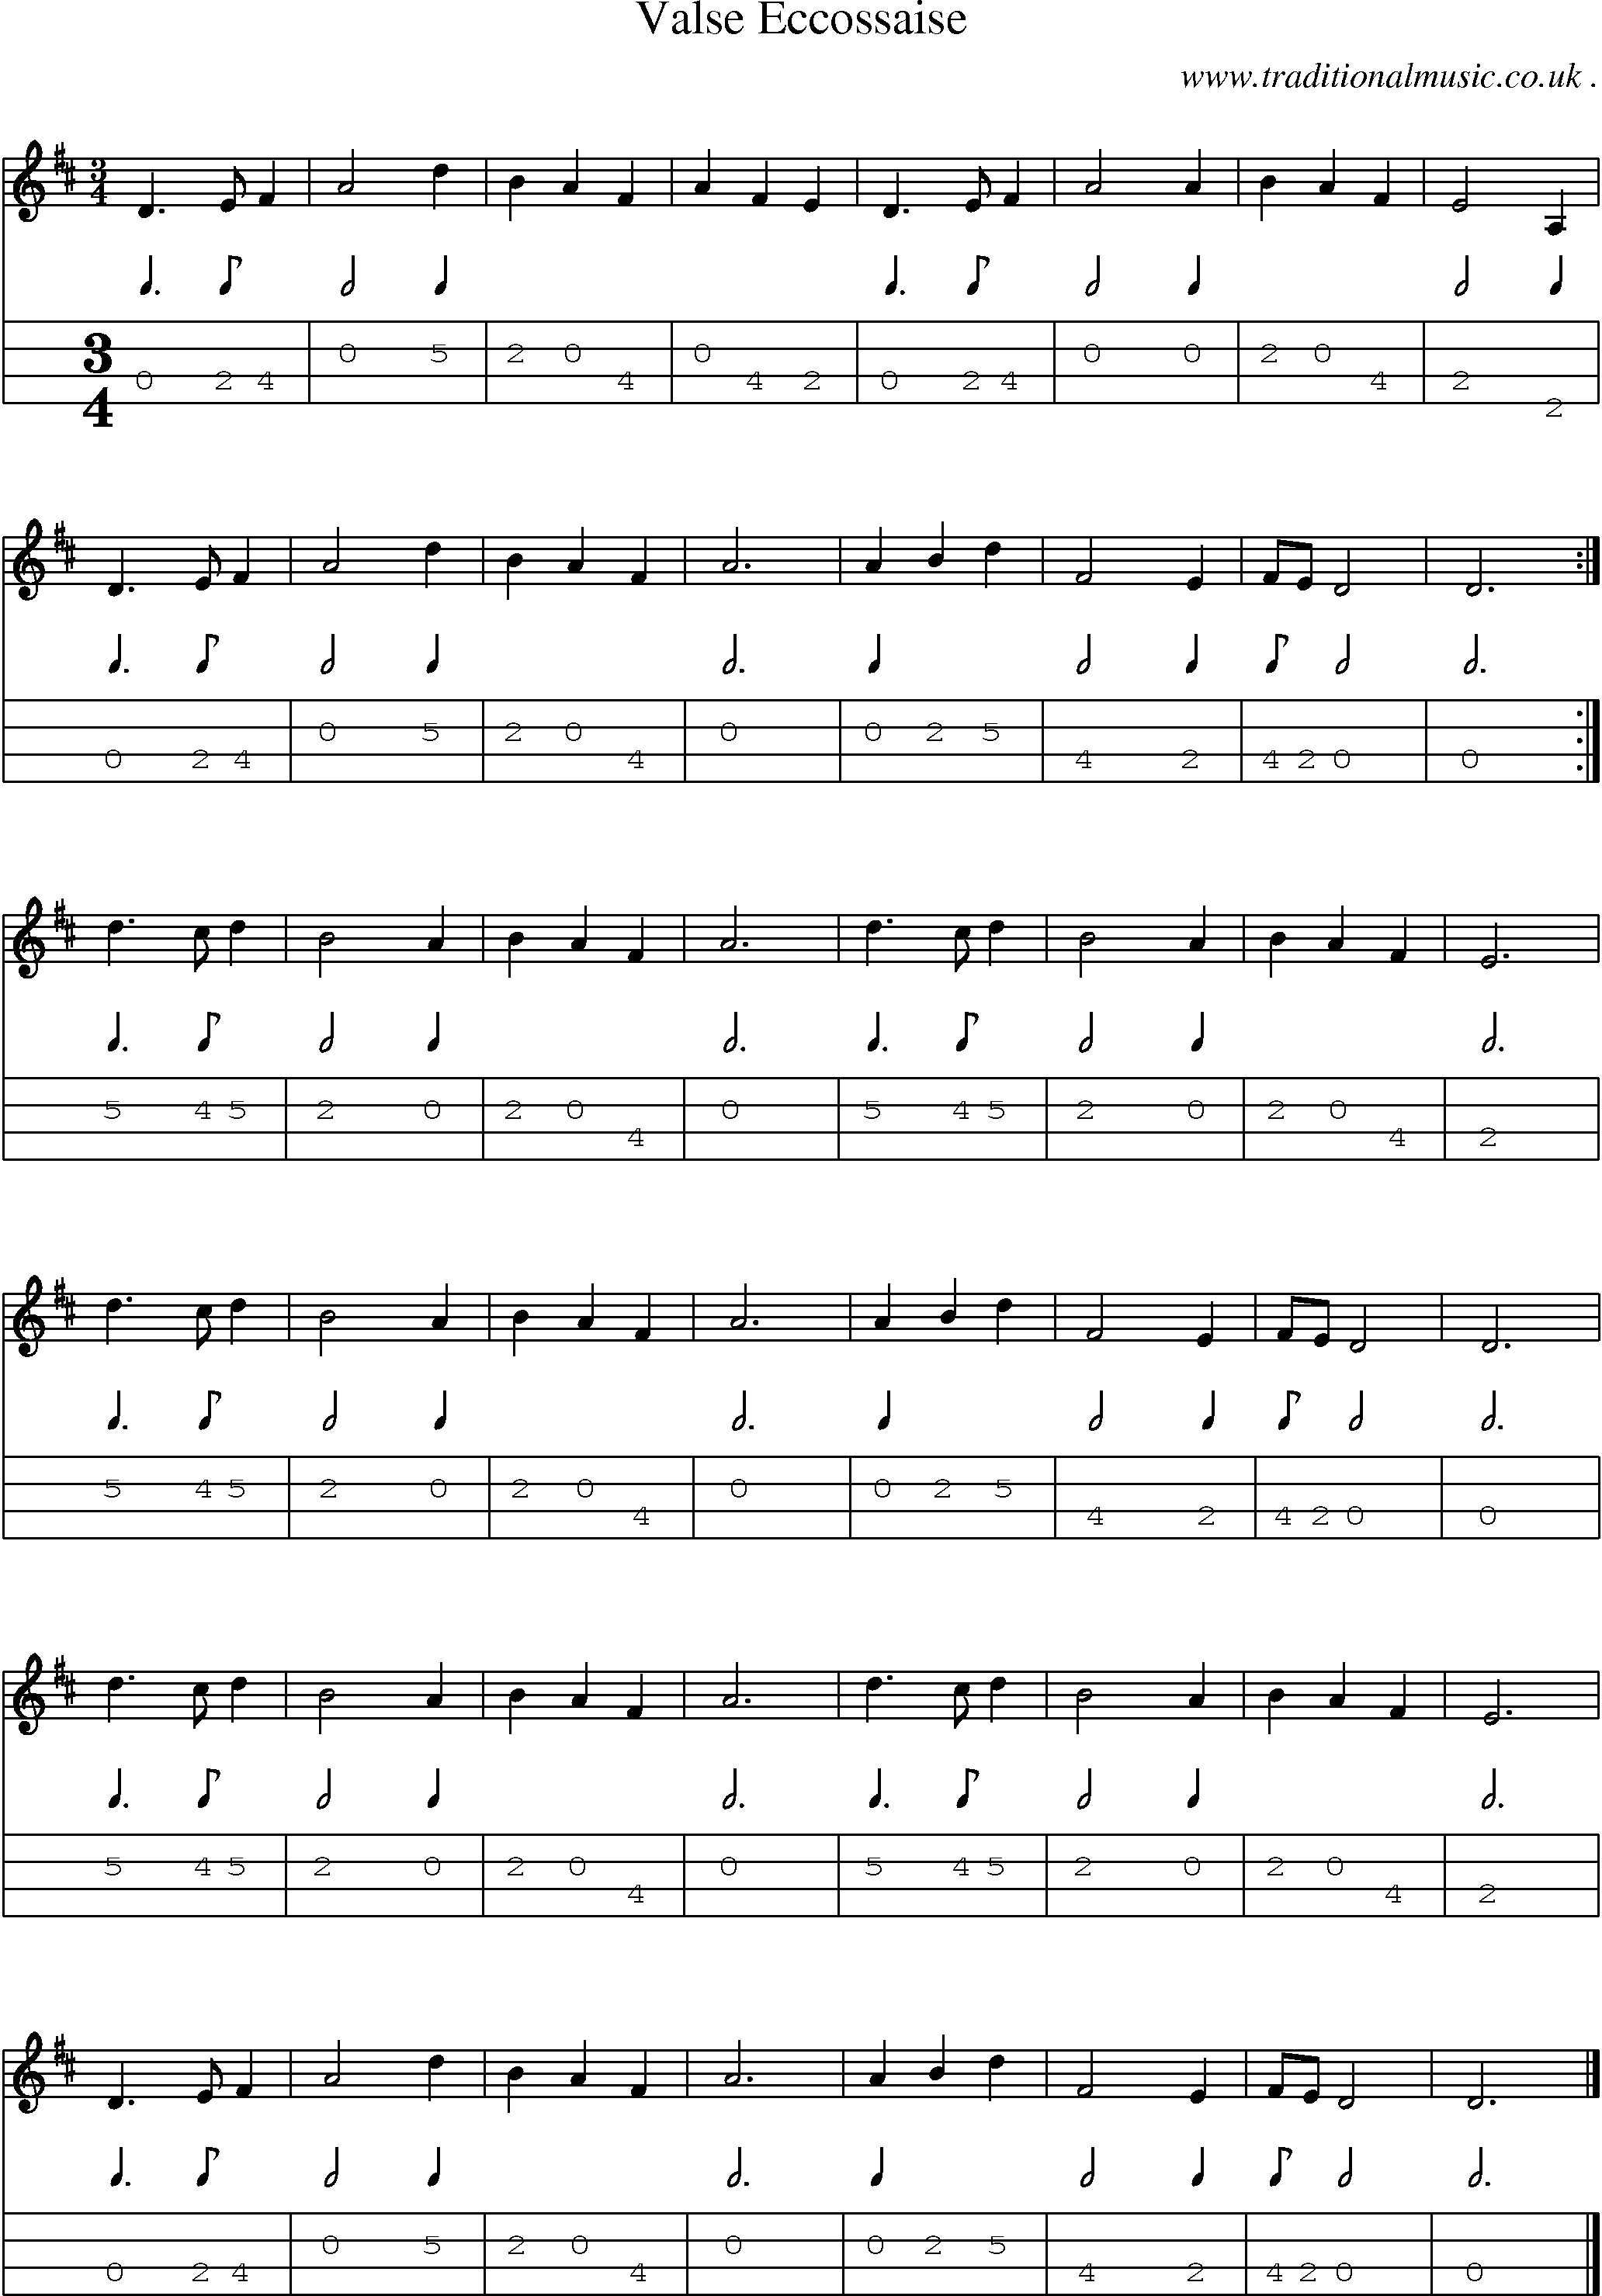 Sheet-music  score, Chords and Mandolin Tabs for Valse Eccossaise